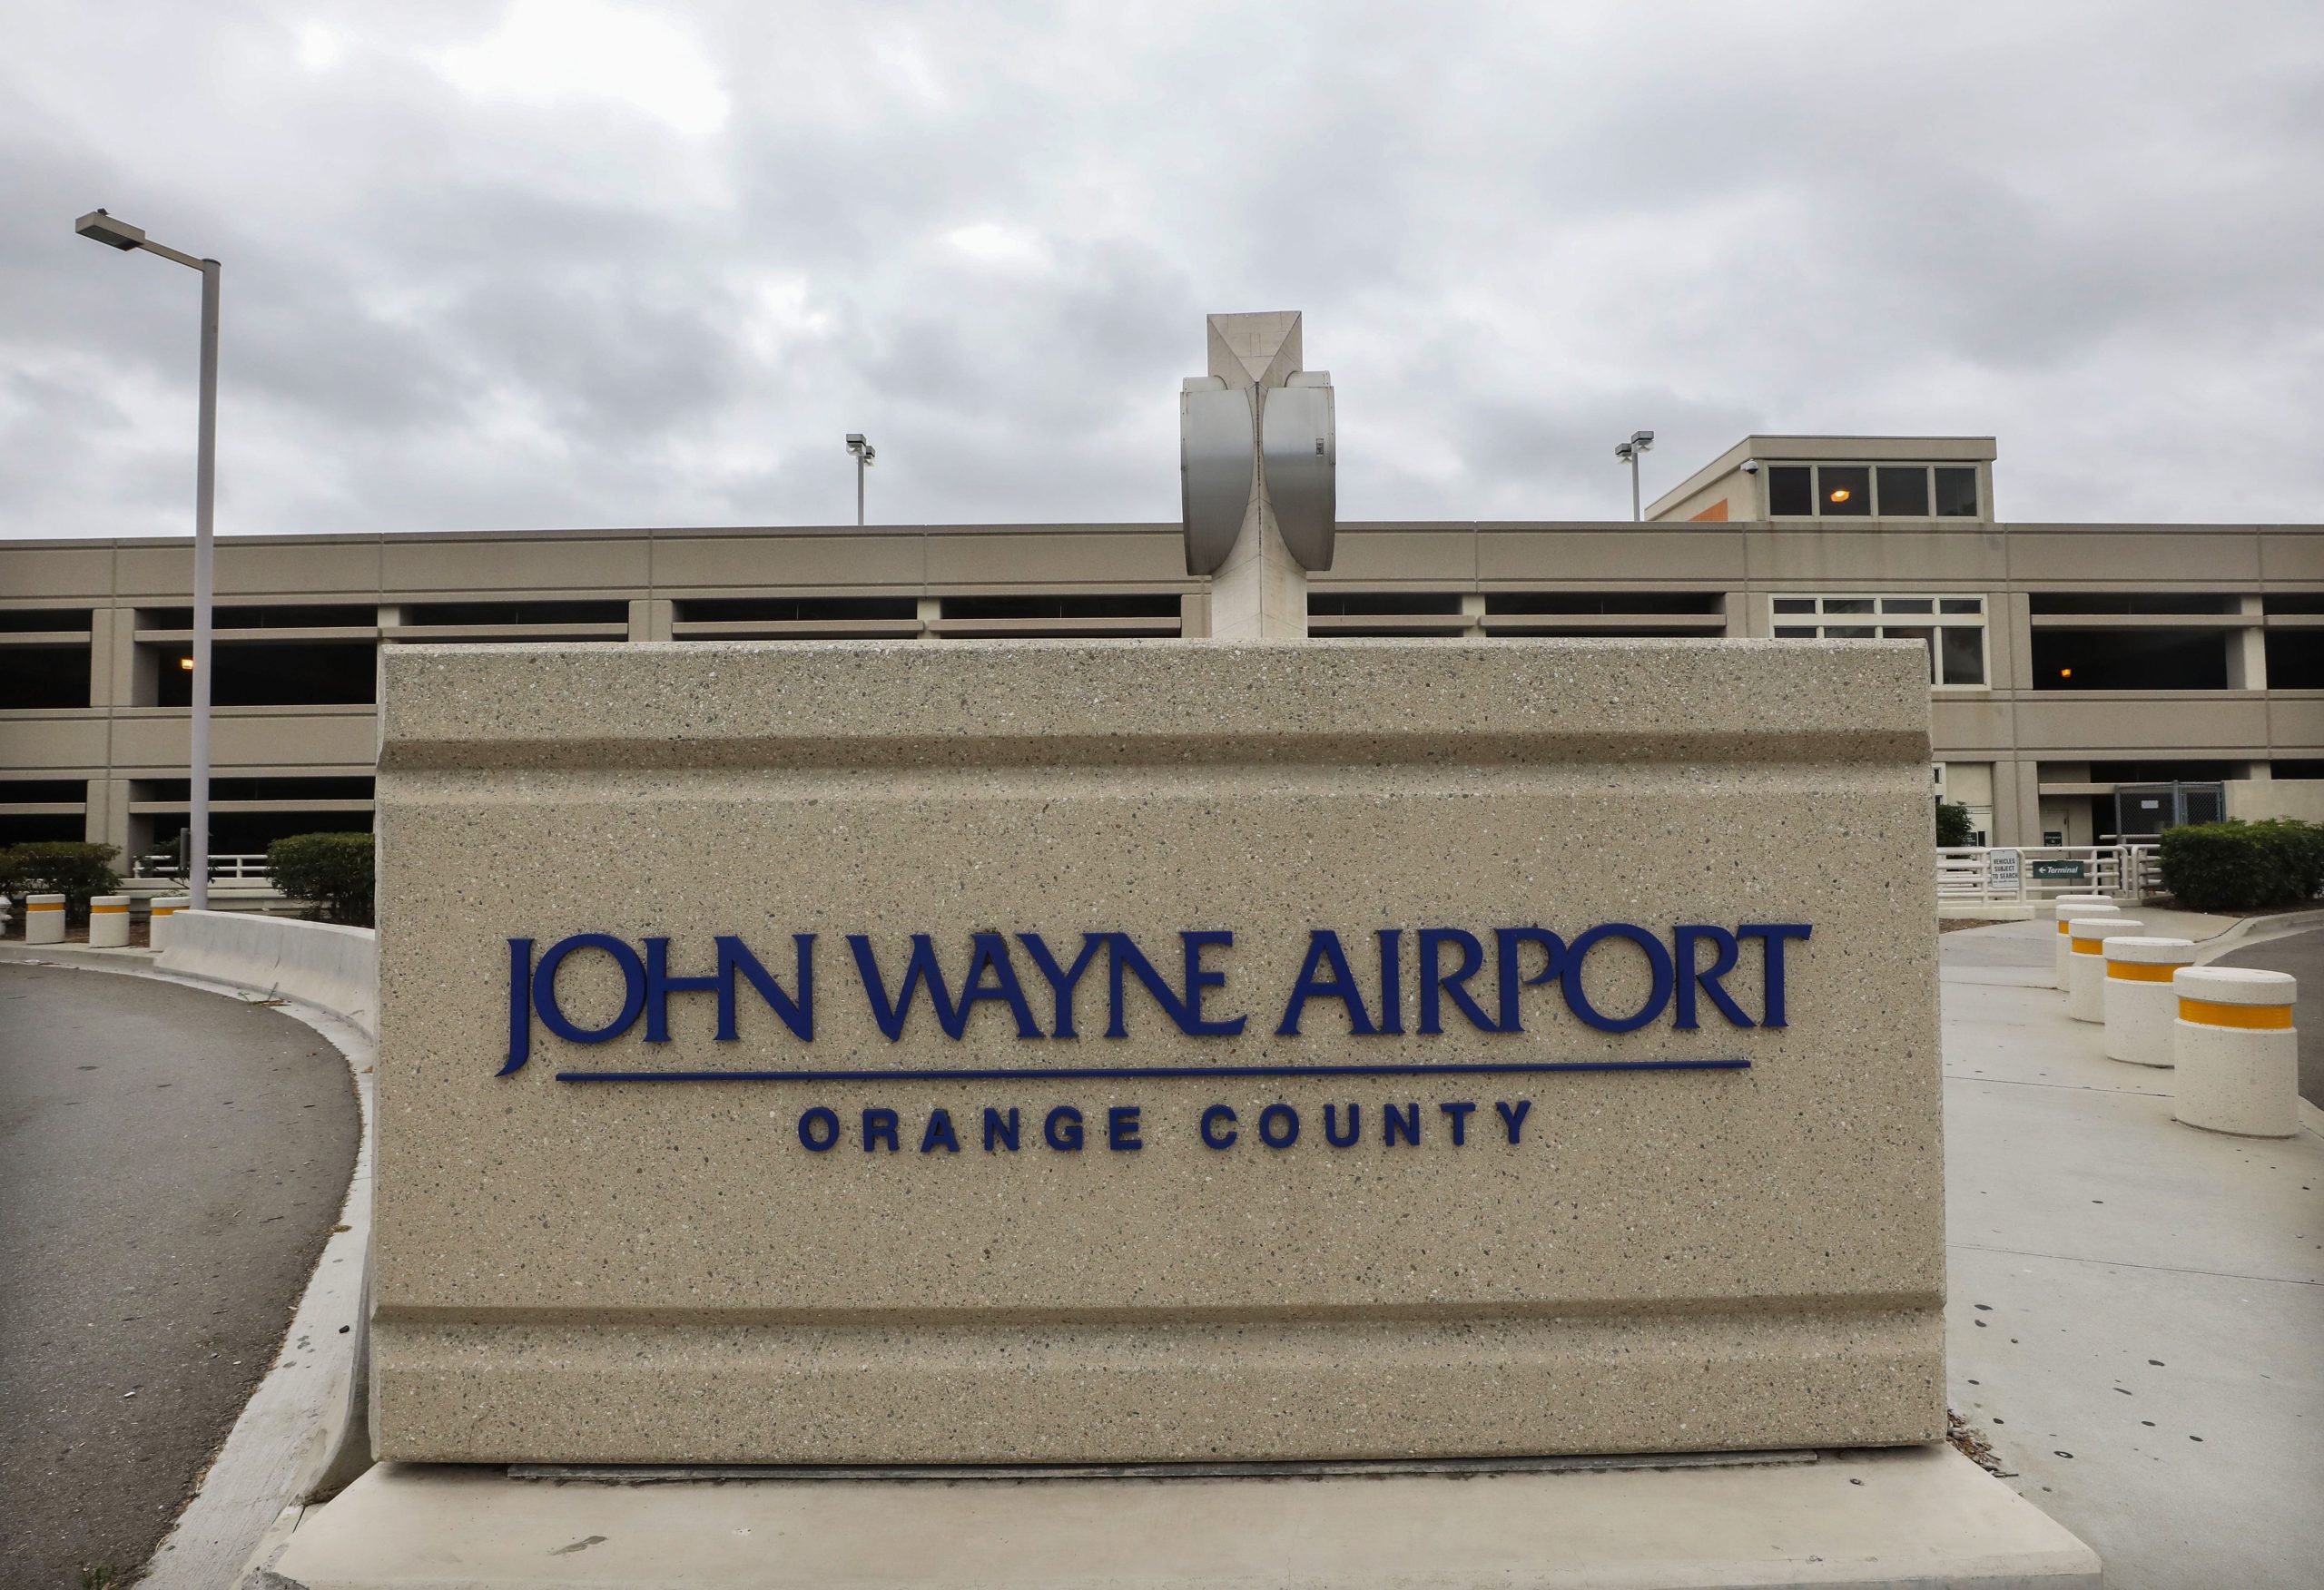 Democrats are calling for the name of John Wayne airport to be changed and the statue to be removed due to the deceased actor's 'racist and bigoted statements'.